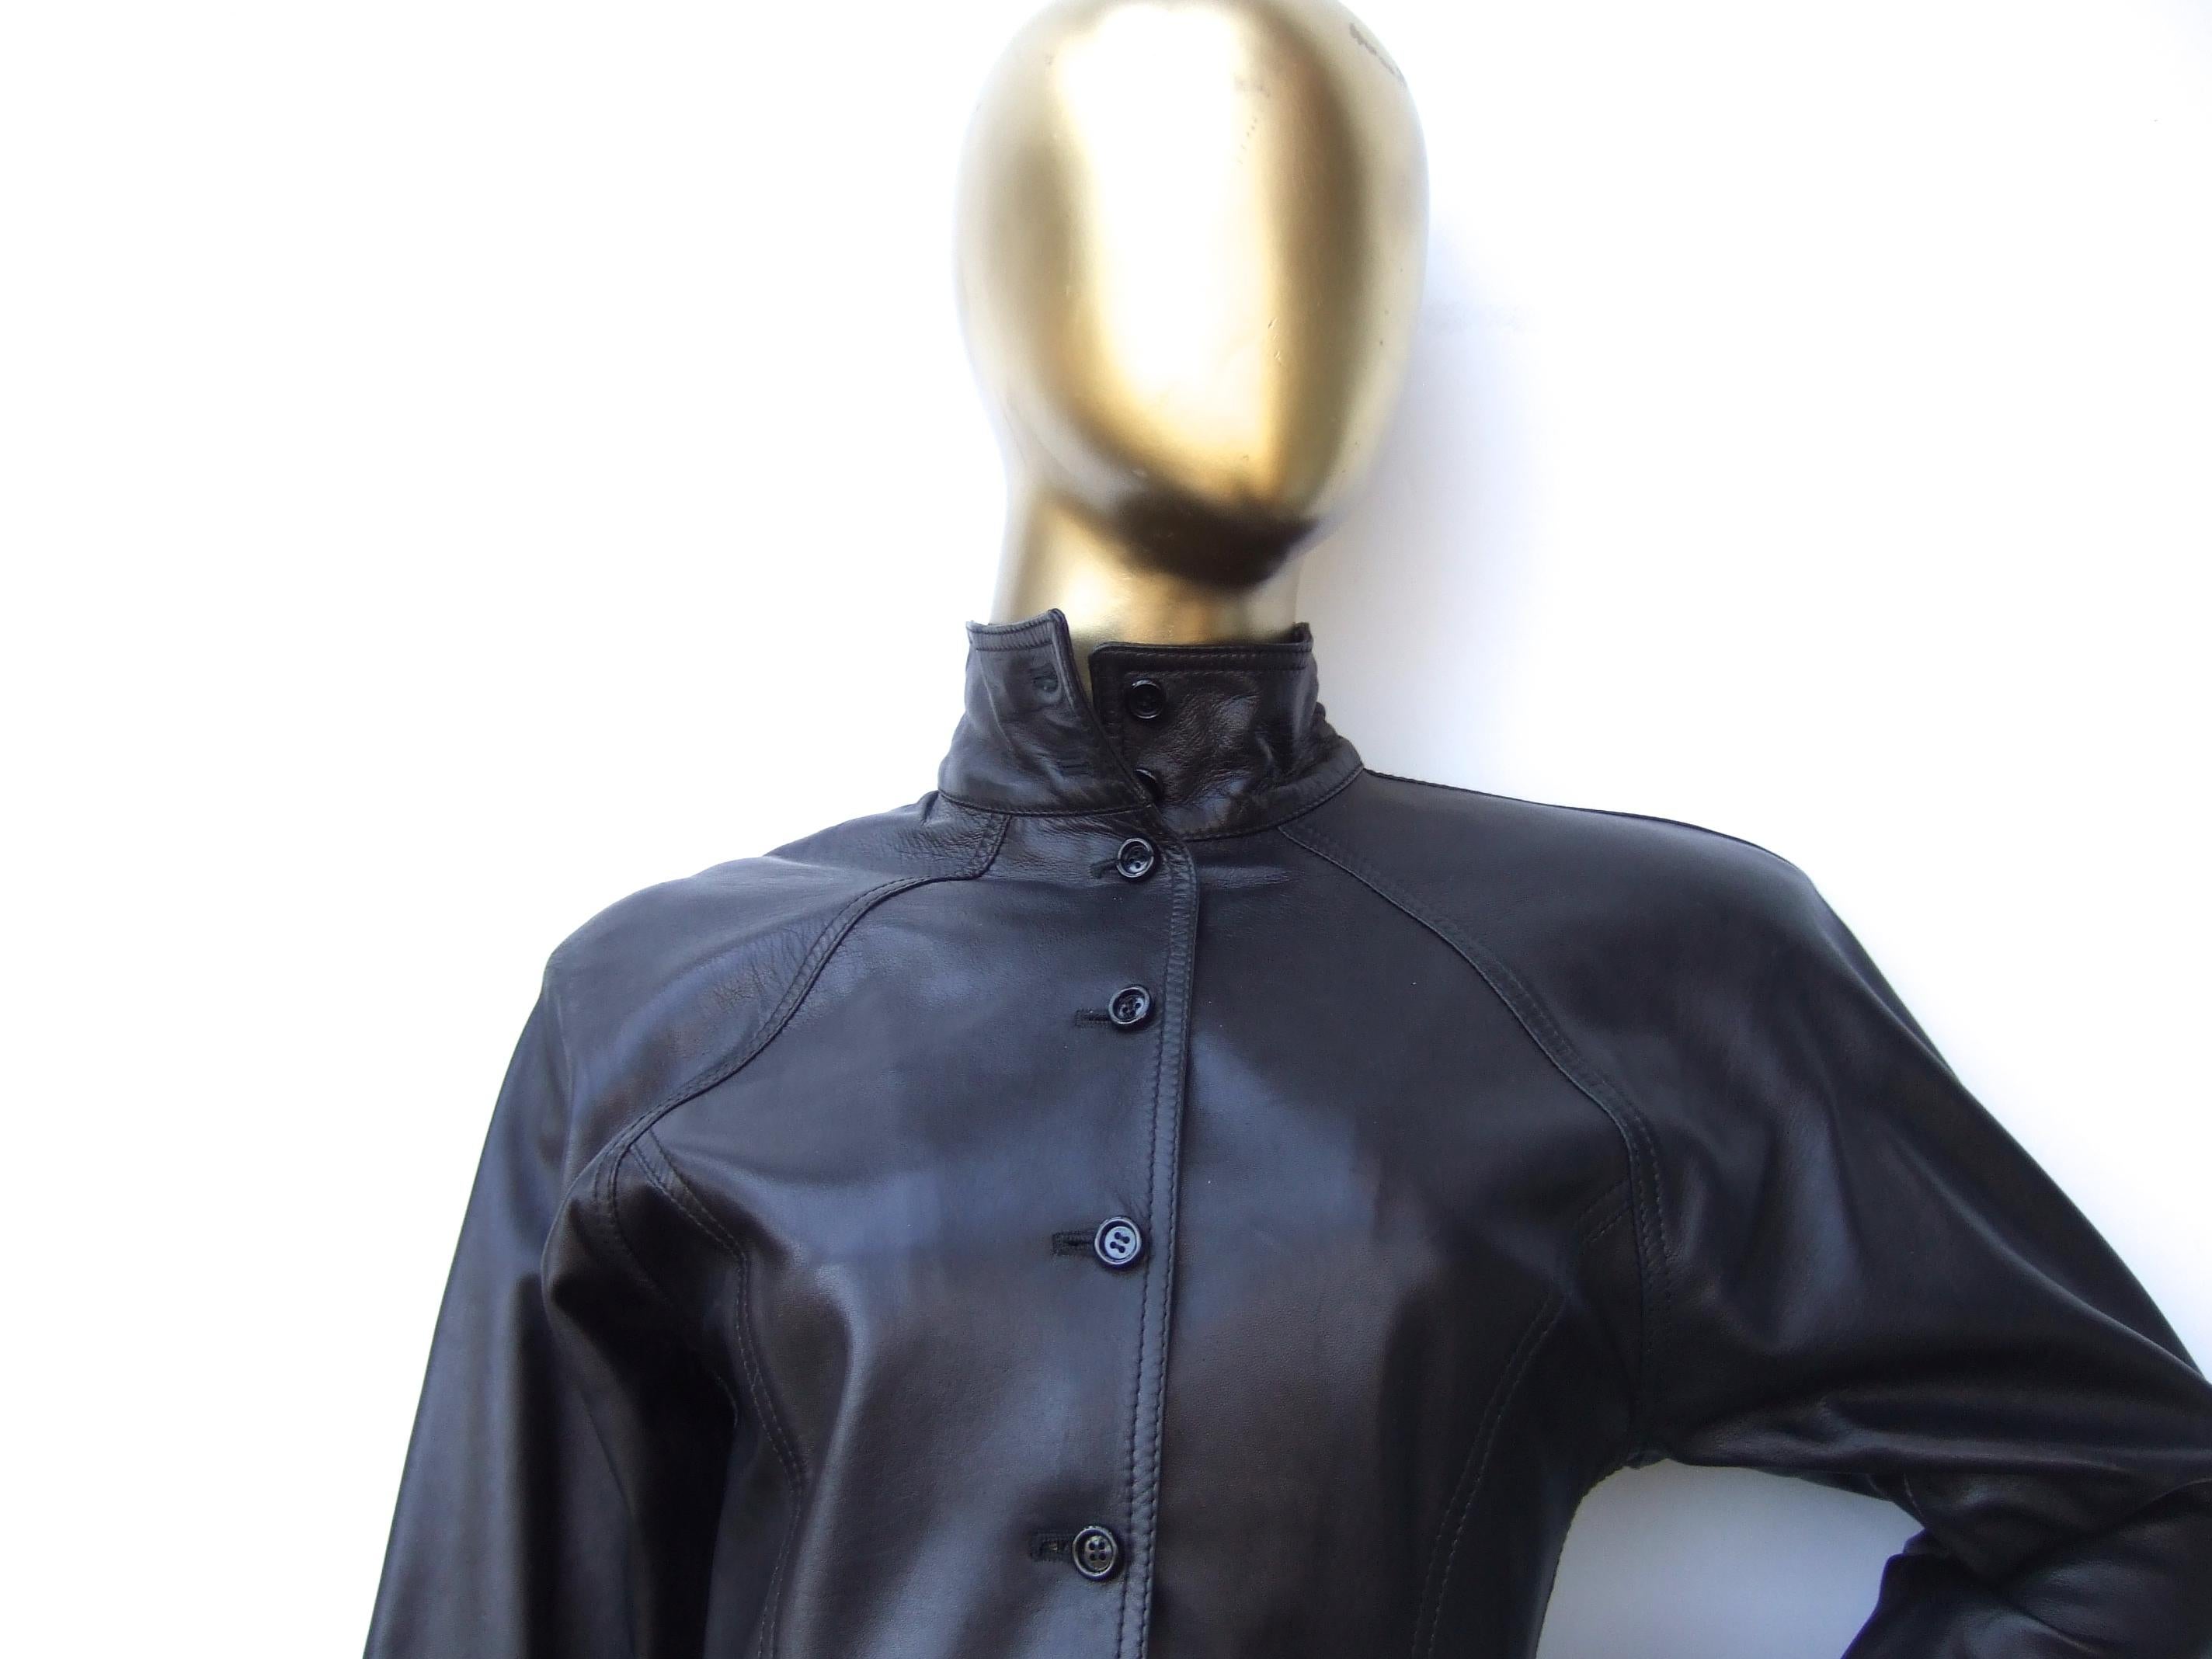 Emanuel Ungaro Paris Avant-garde Edgy Brown Leather Dress Made in Italy c 1980s For Sale 5